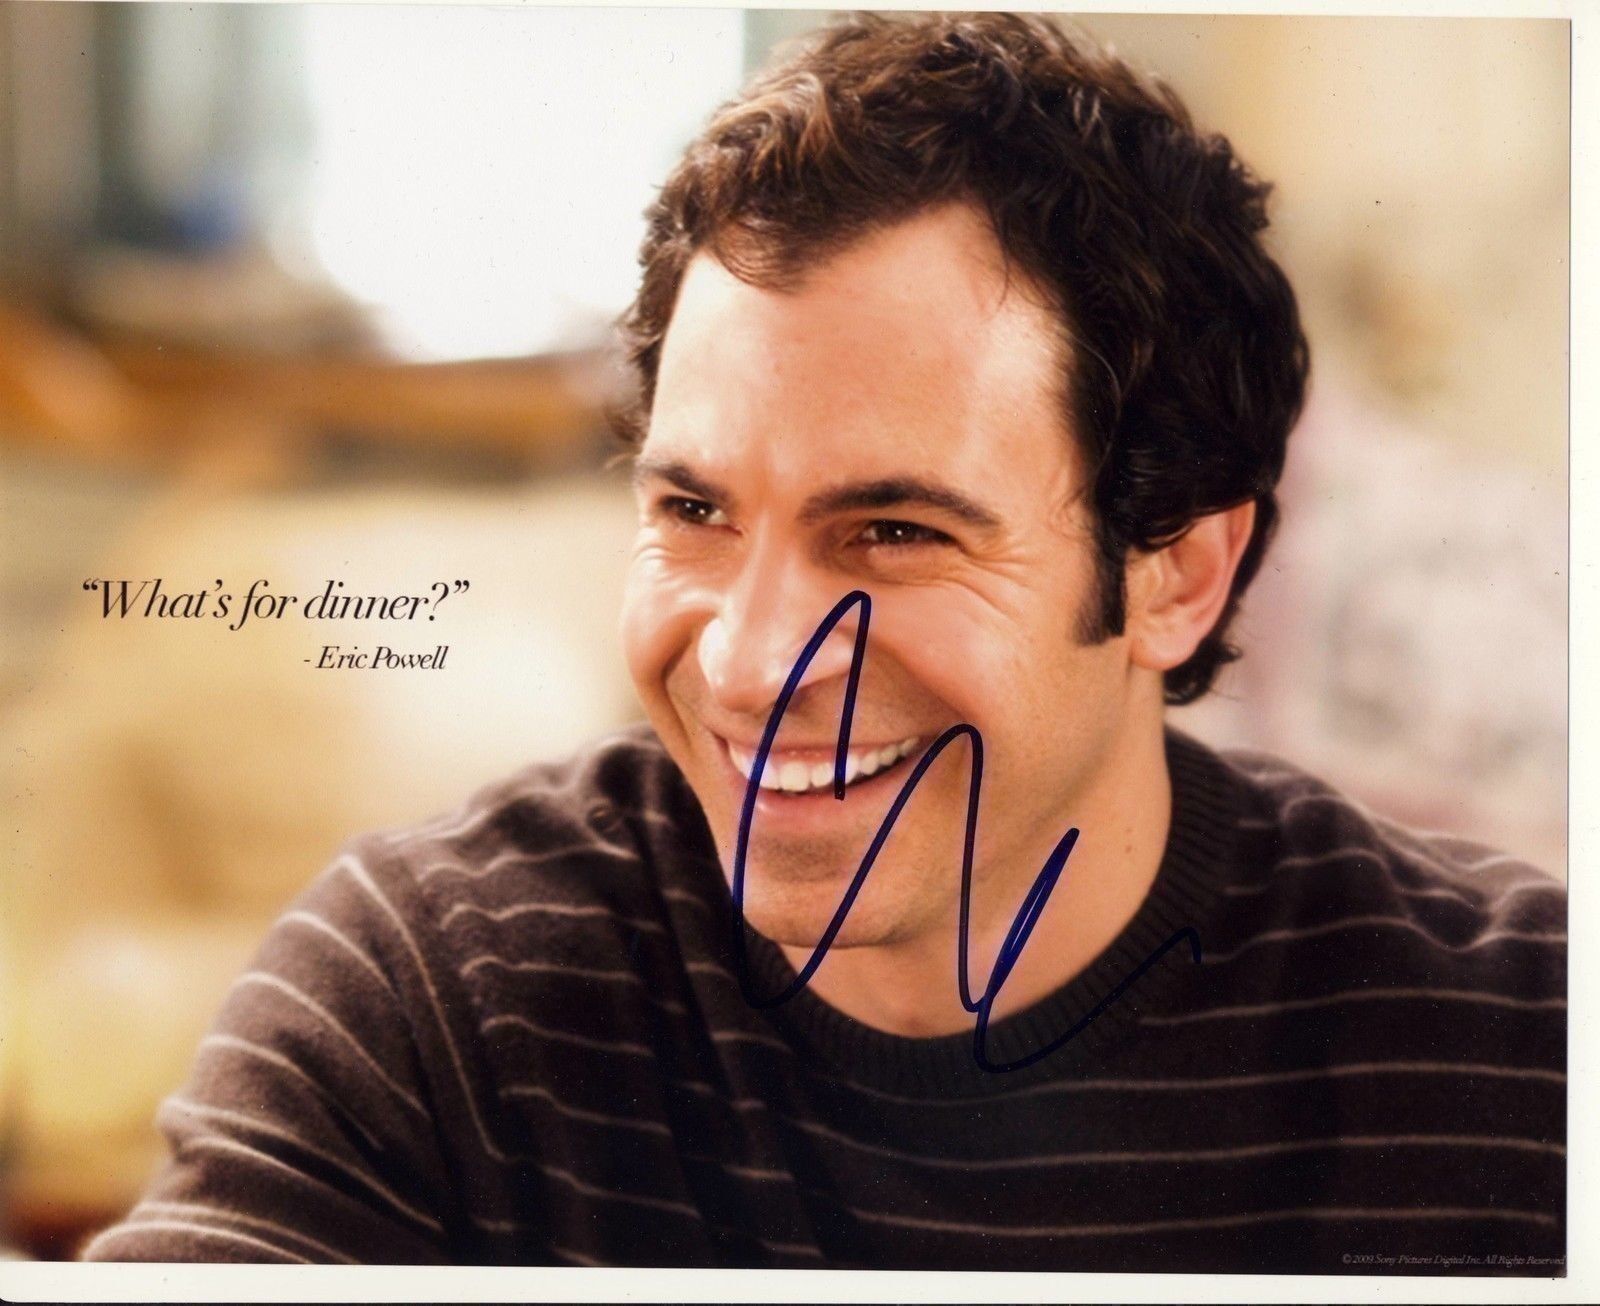 Chris Messina Autograph Signed 8x10 Photo Poster painting AFTAL [4674]